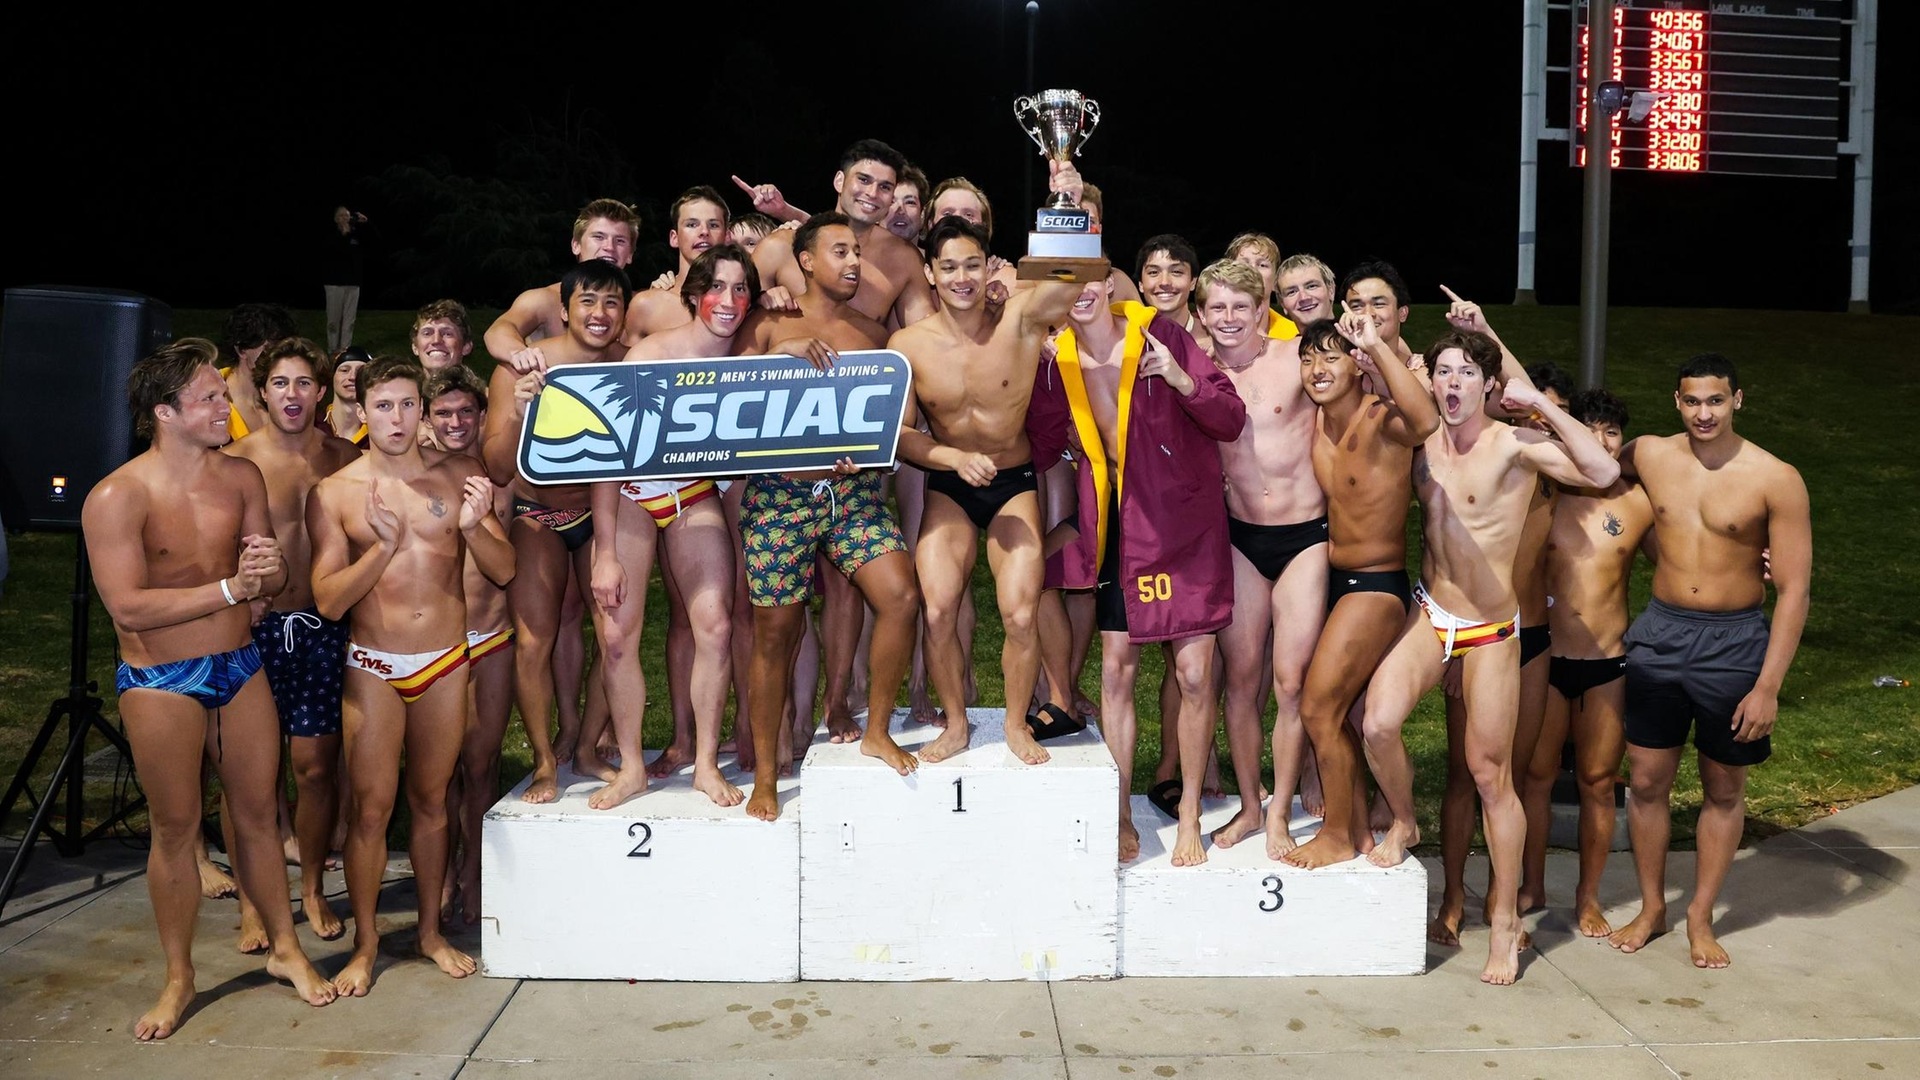 CMS won by 143 points to earn the 39th SCIAC title in program history